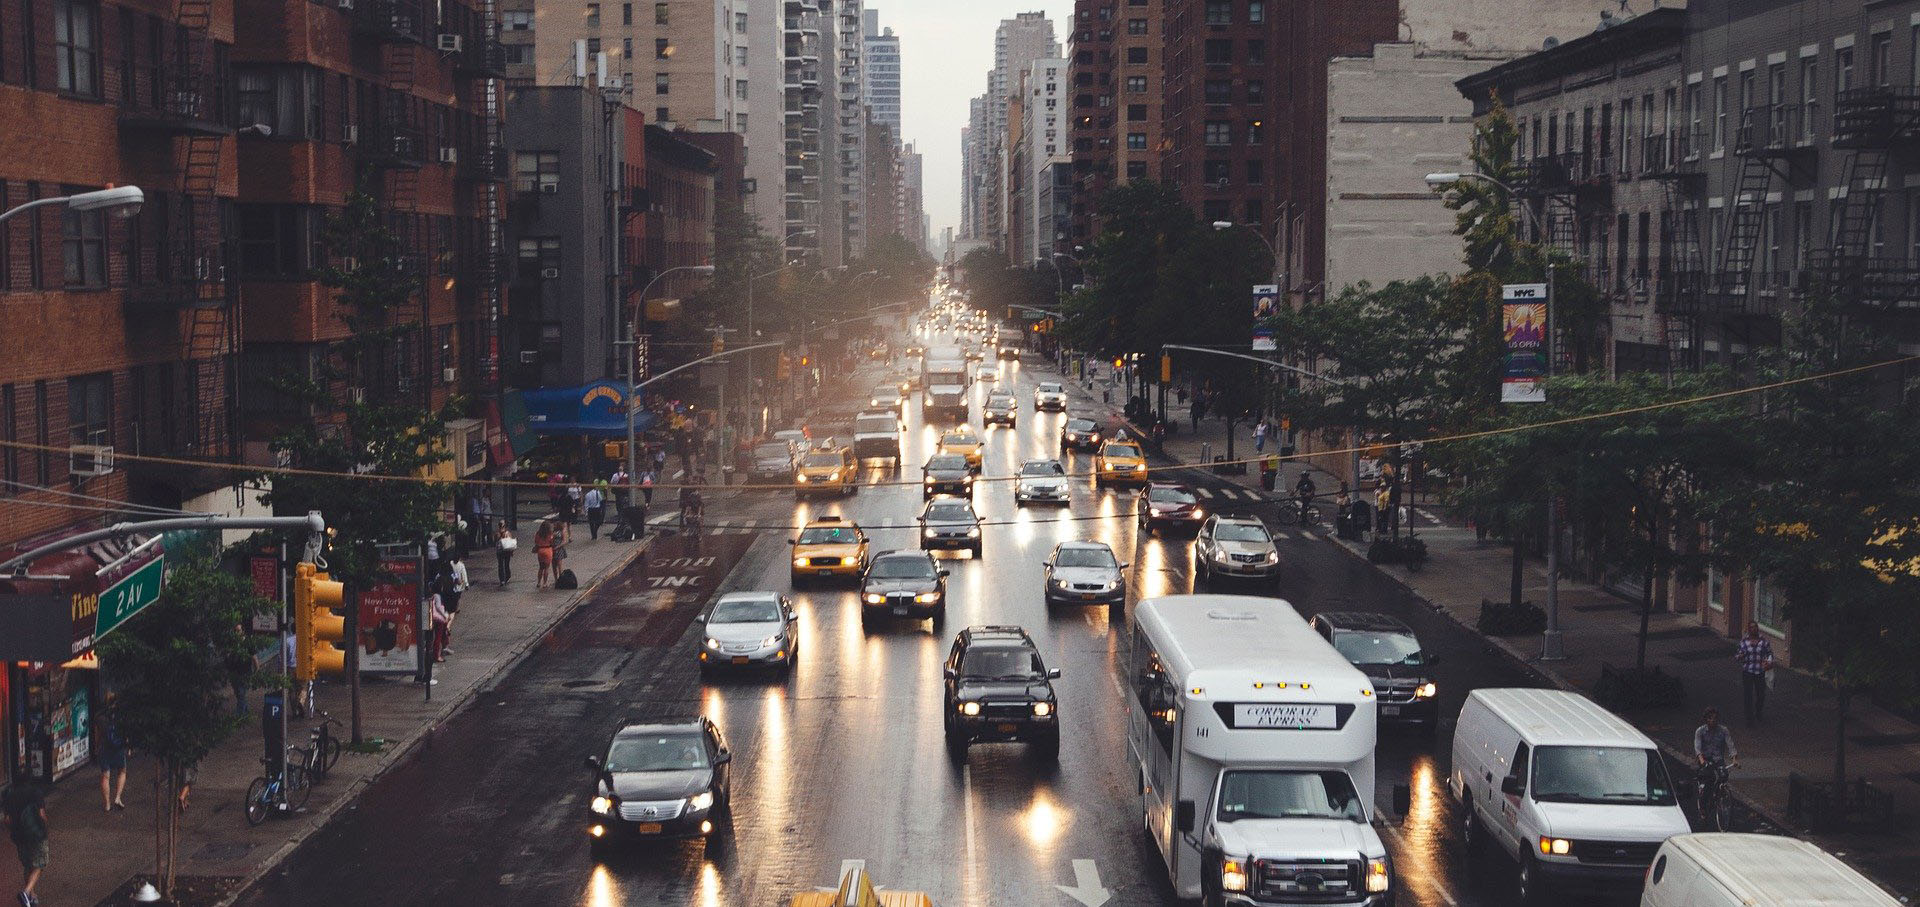 Urban Mobility is the key issues for cities' sustainability.